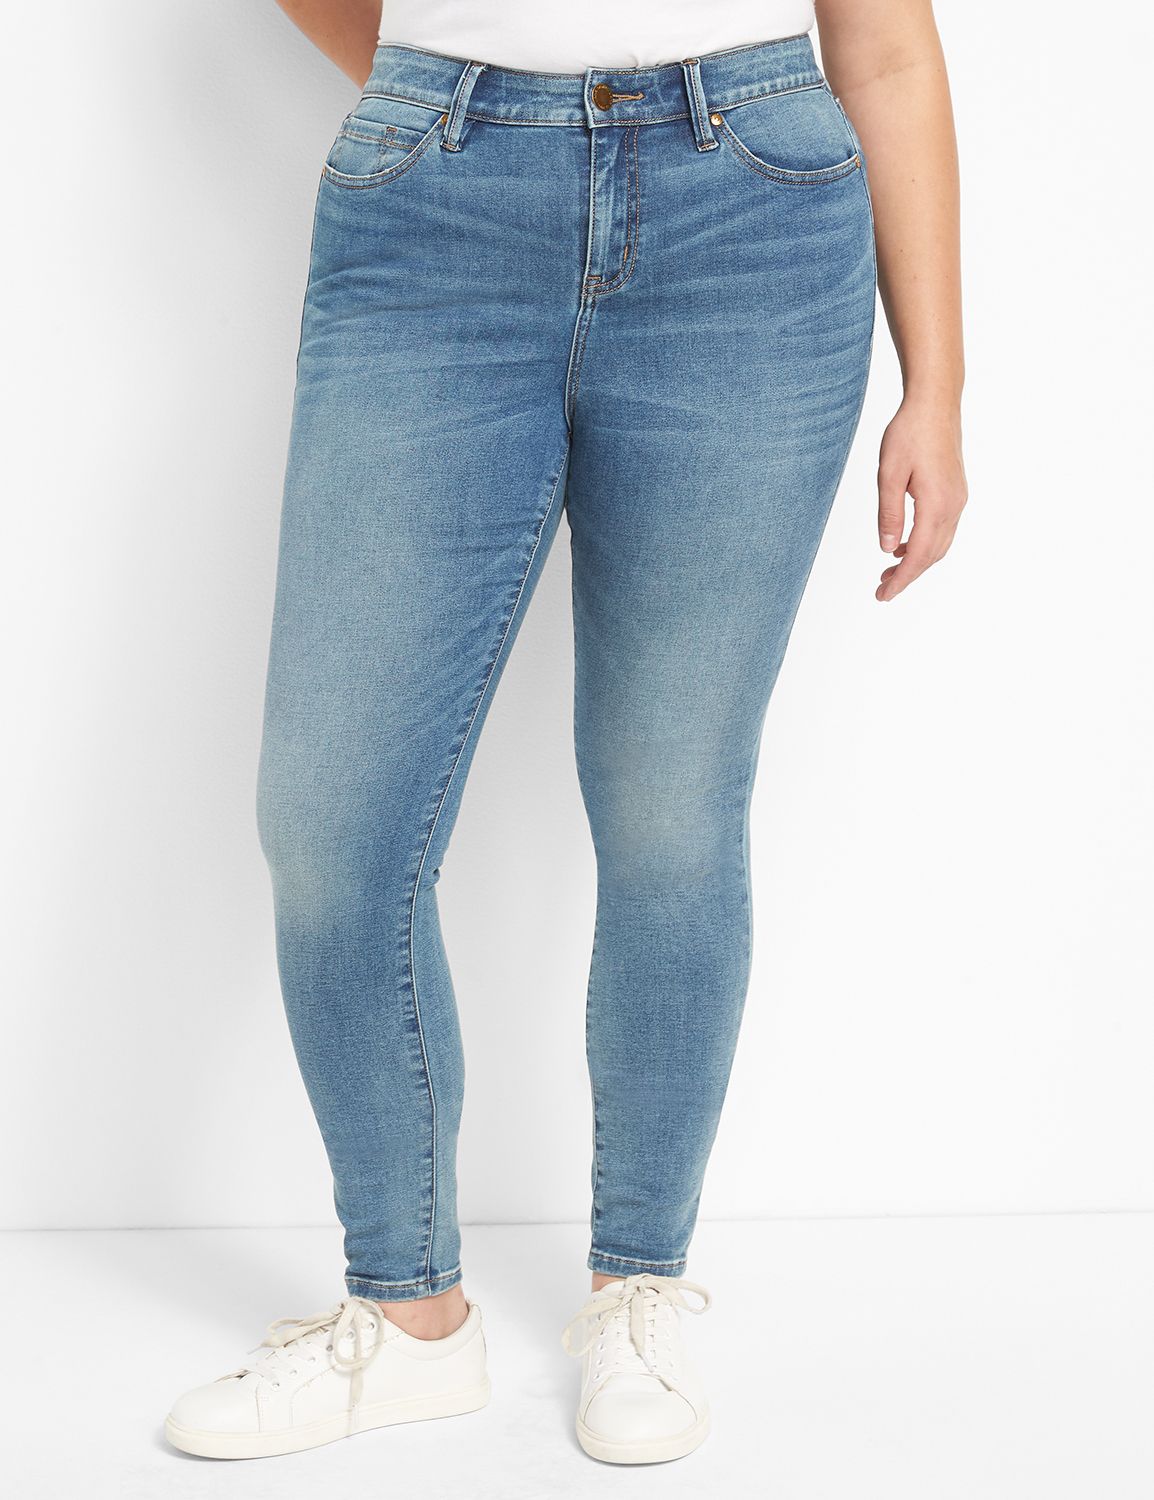 Lane Bryant Lace Skinny Jeans for Women